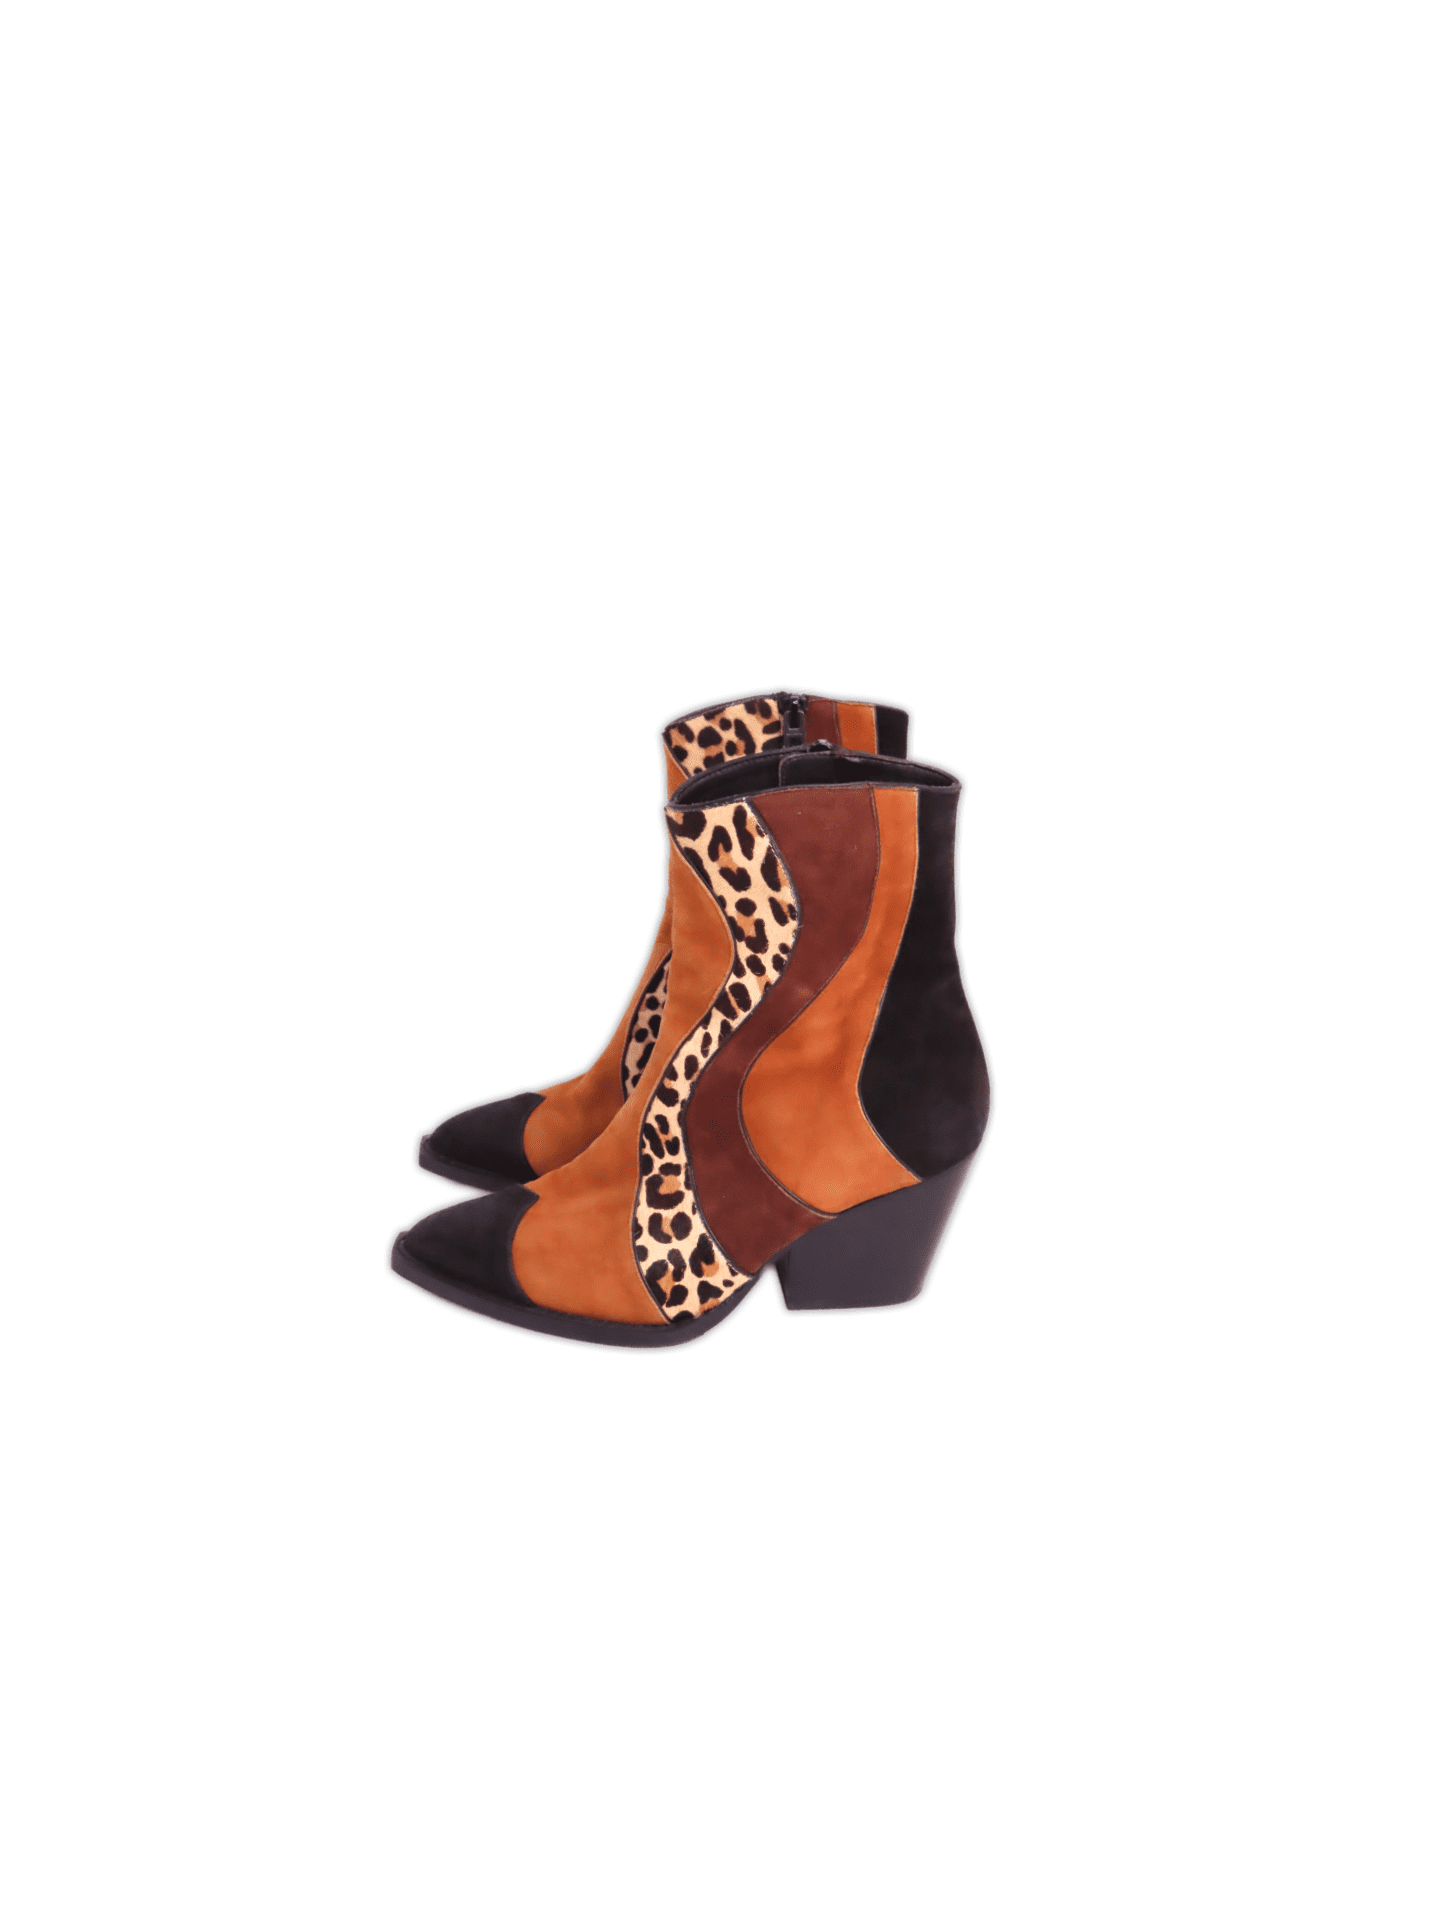 Suede cowboy boots featuring a block heel, pointed toe and side zipper. Sole and heel made from Genuine Leather. Colours are shades of Brown, Black and Leopard Print.